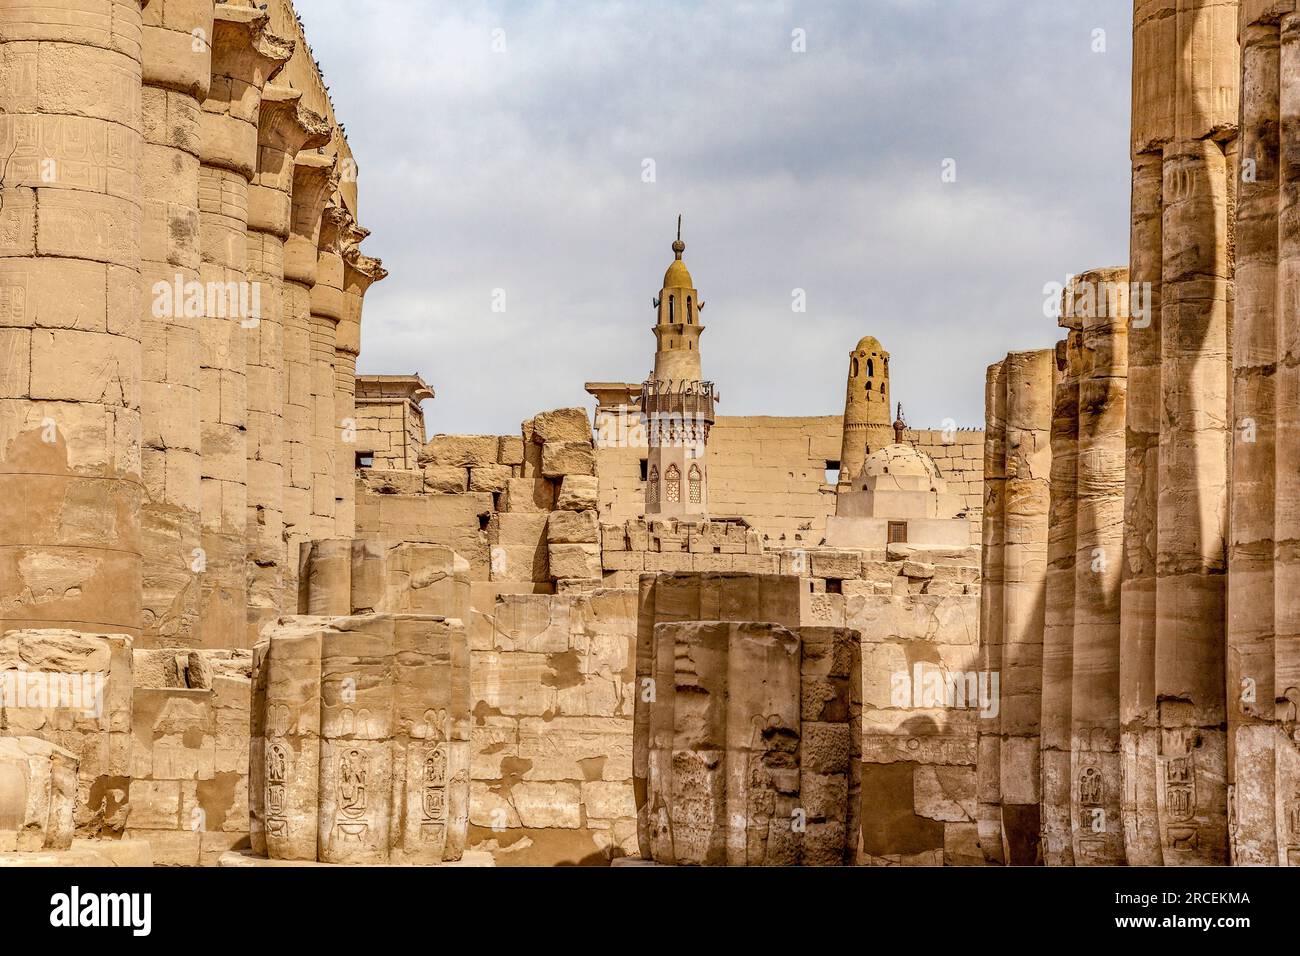 Court of Rameses II and Abou al-Haggag Mosque at Luxor Temple, Egypt Stock Photo